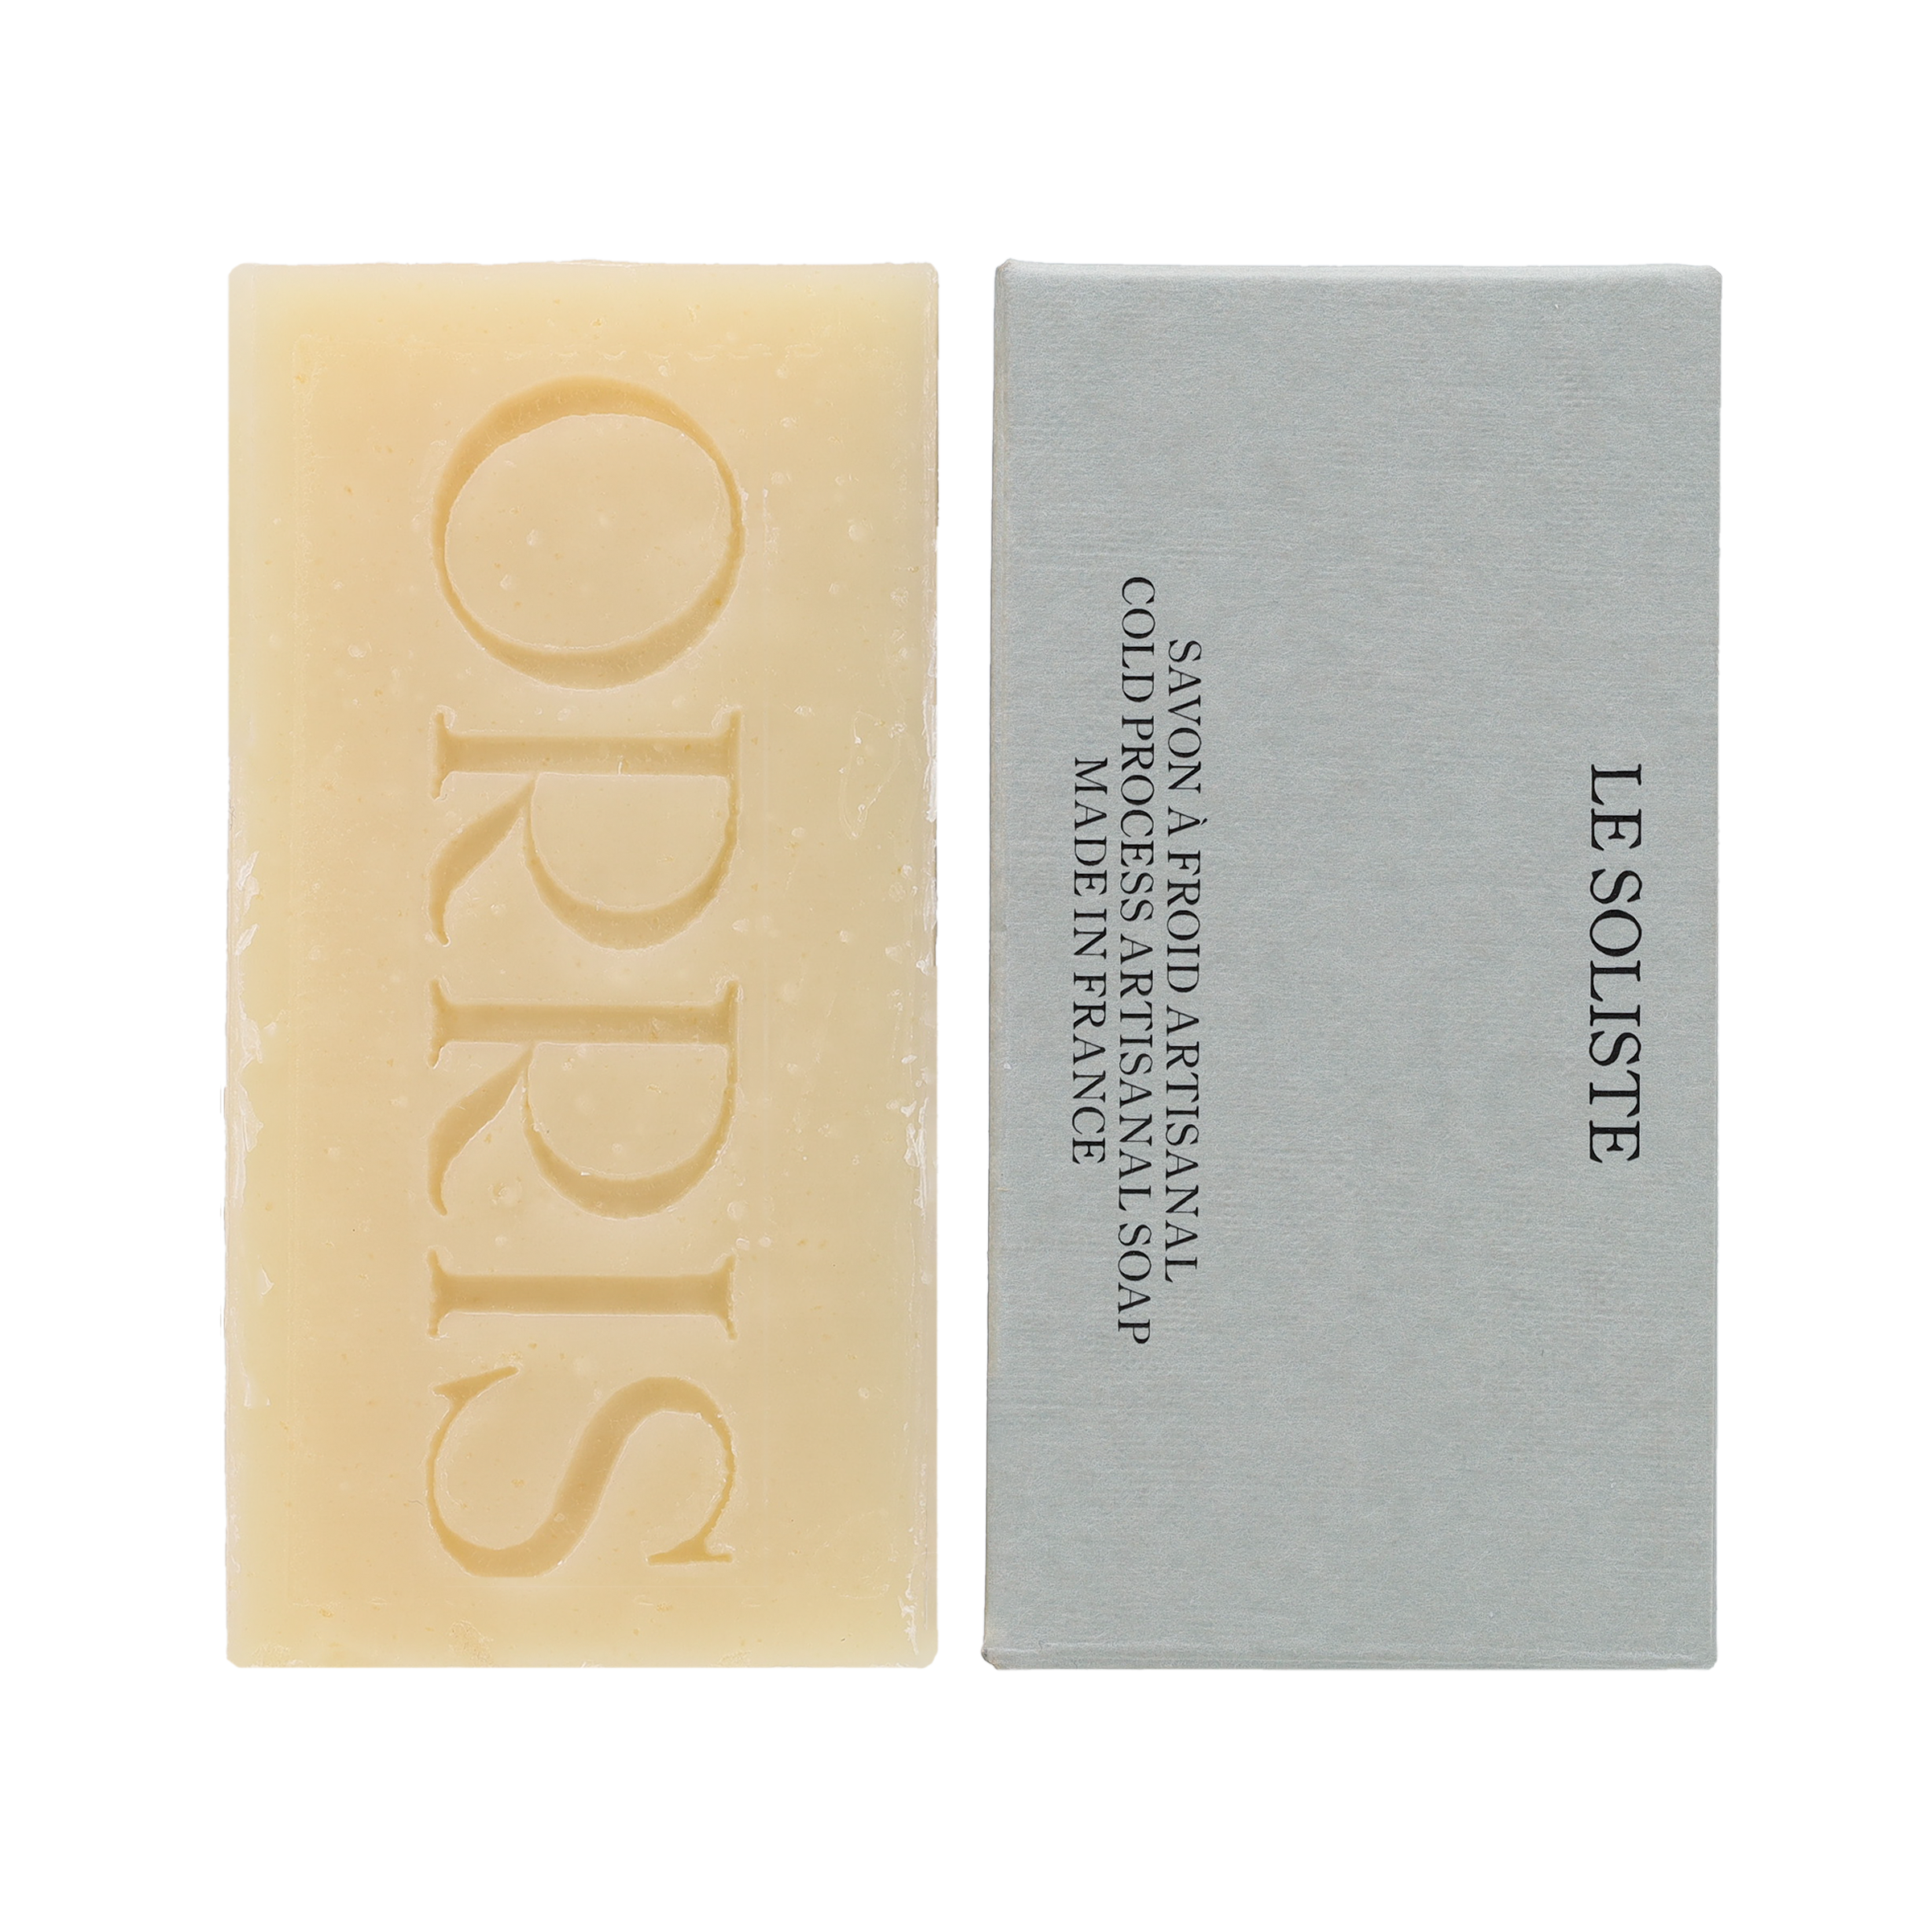 
  
  ORRIS LE SOLISTE Botanical Cleansing Bar- LORDE beauty and cosmetics
  
